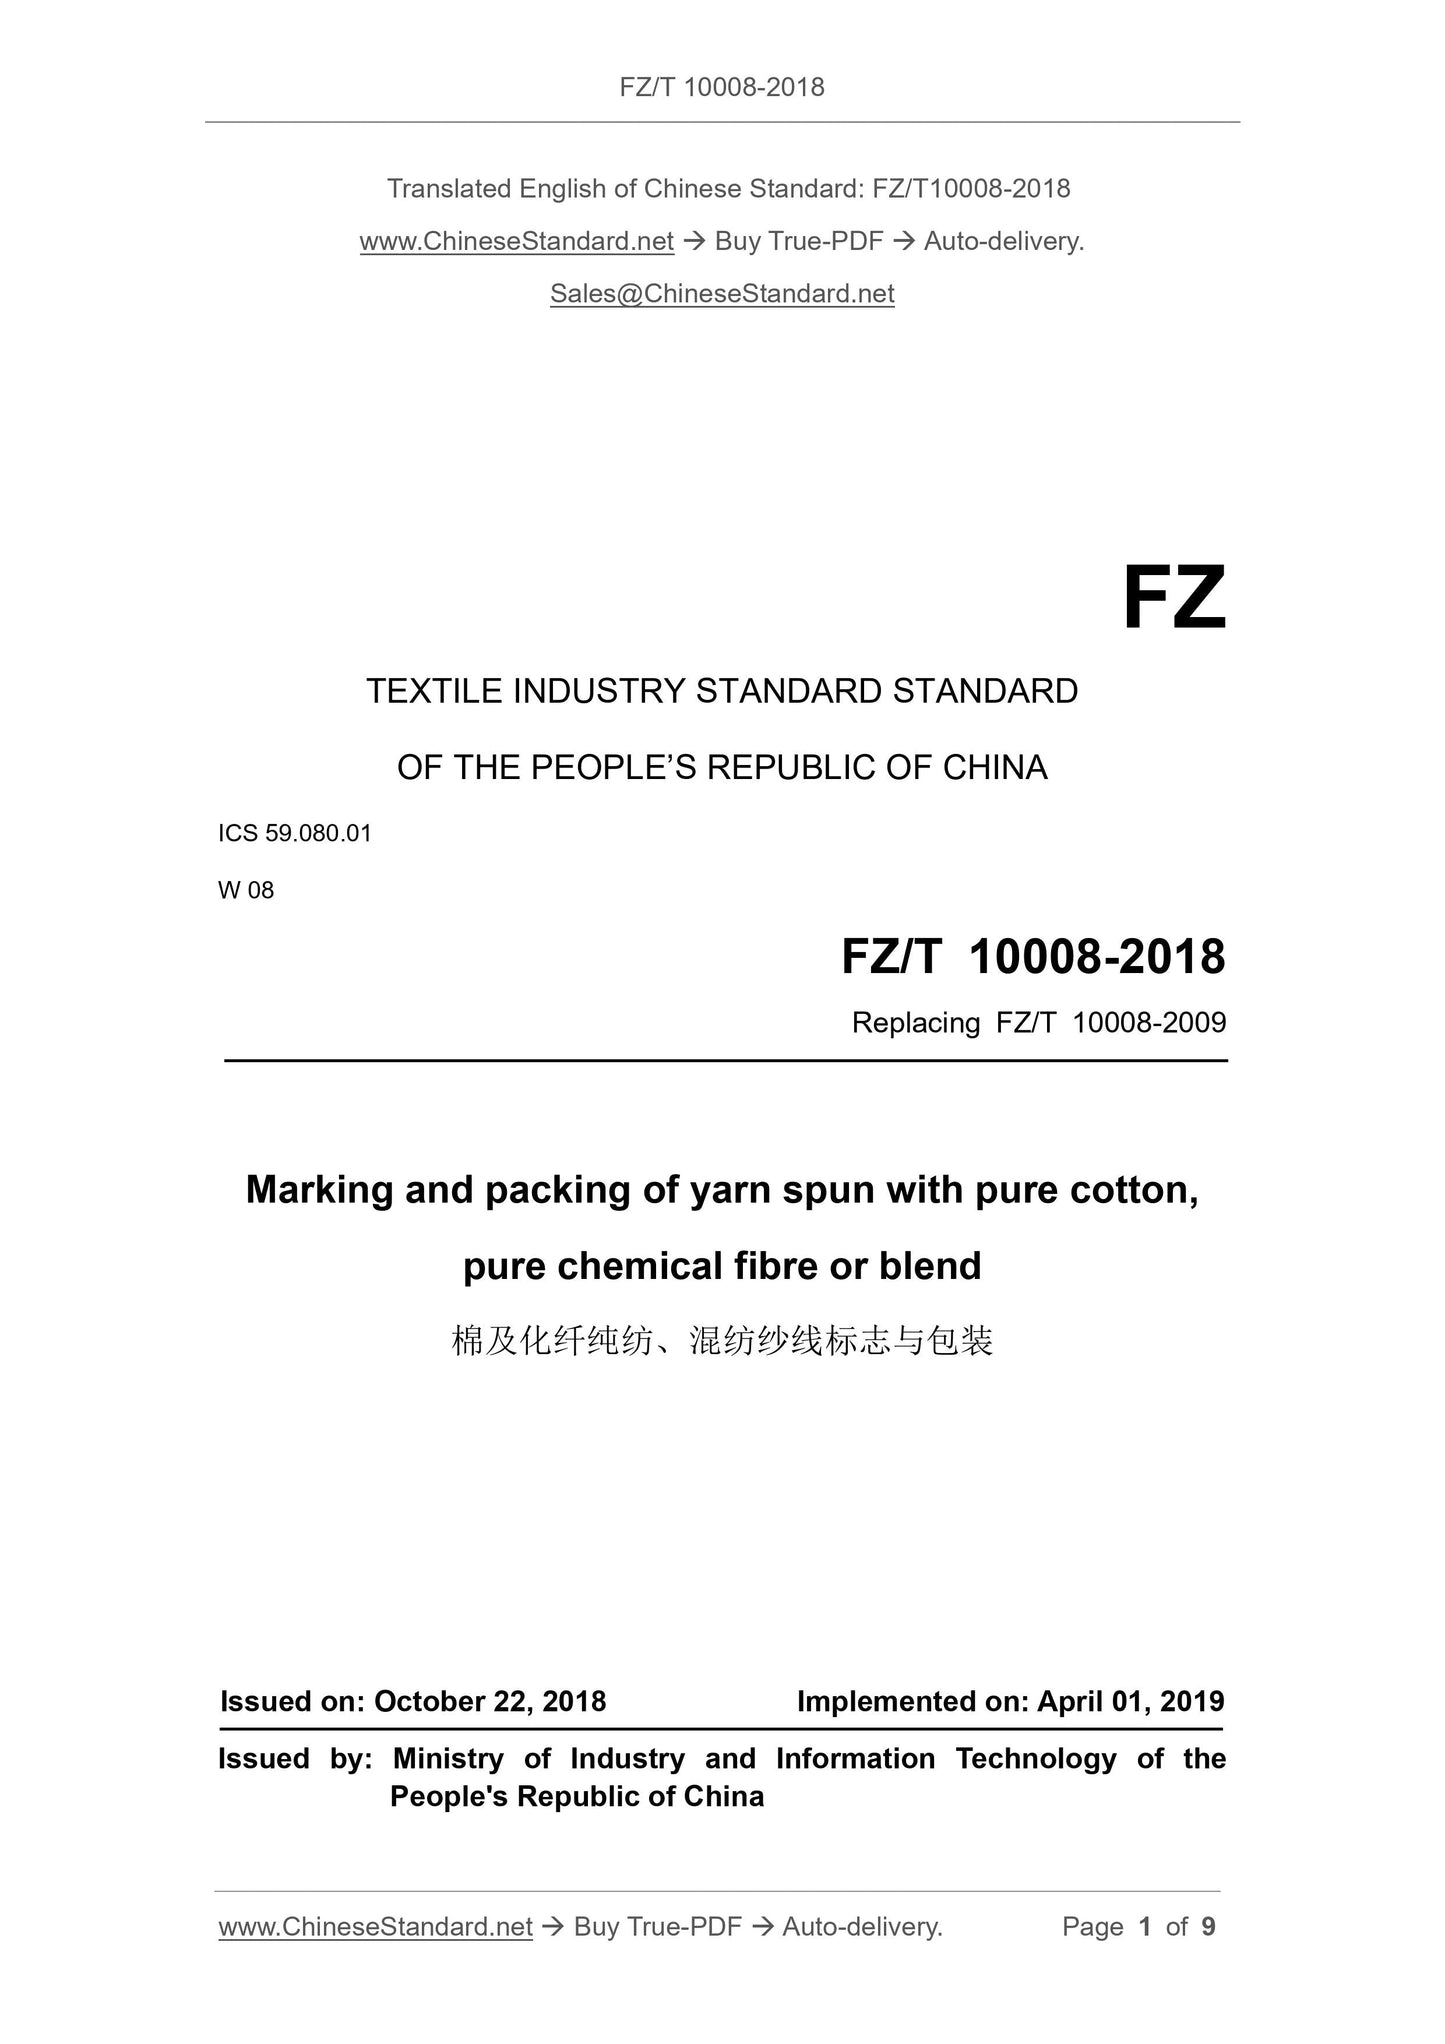 FZ/T 10008-2018 Page 1